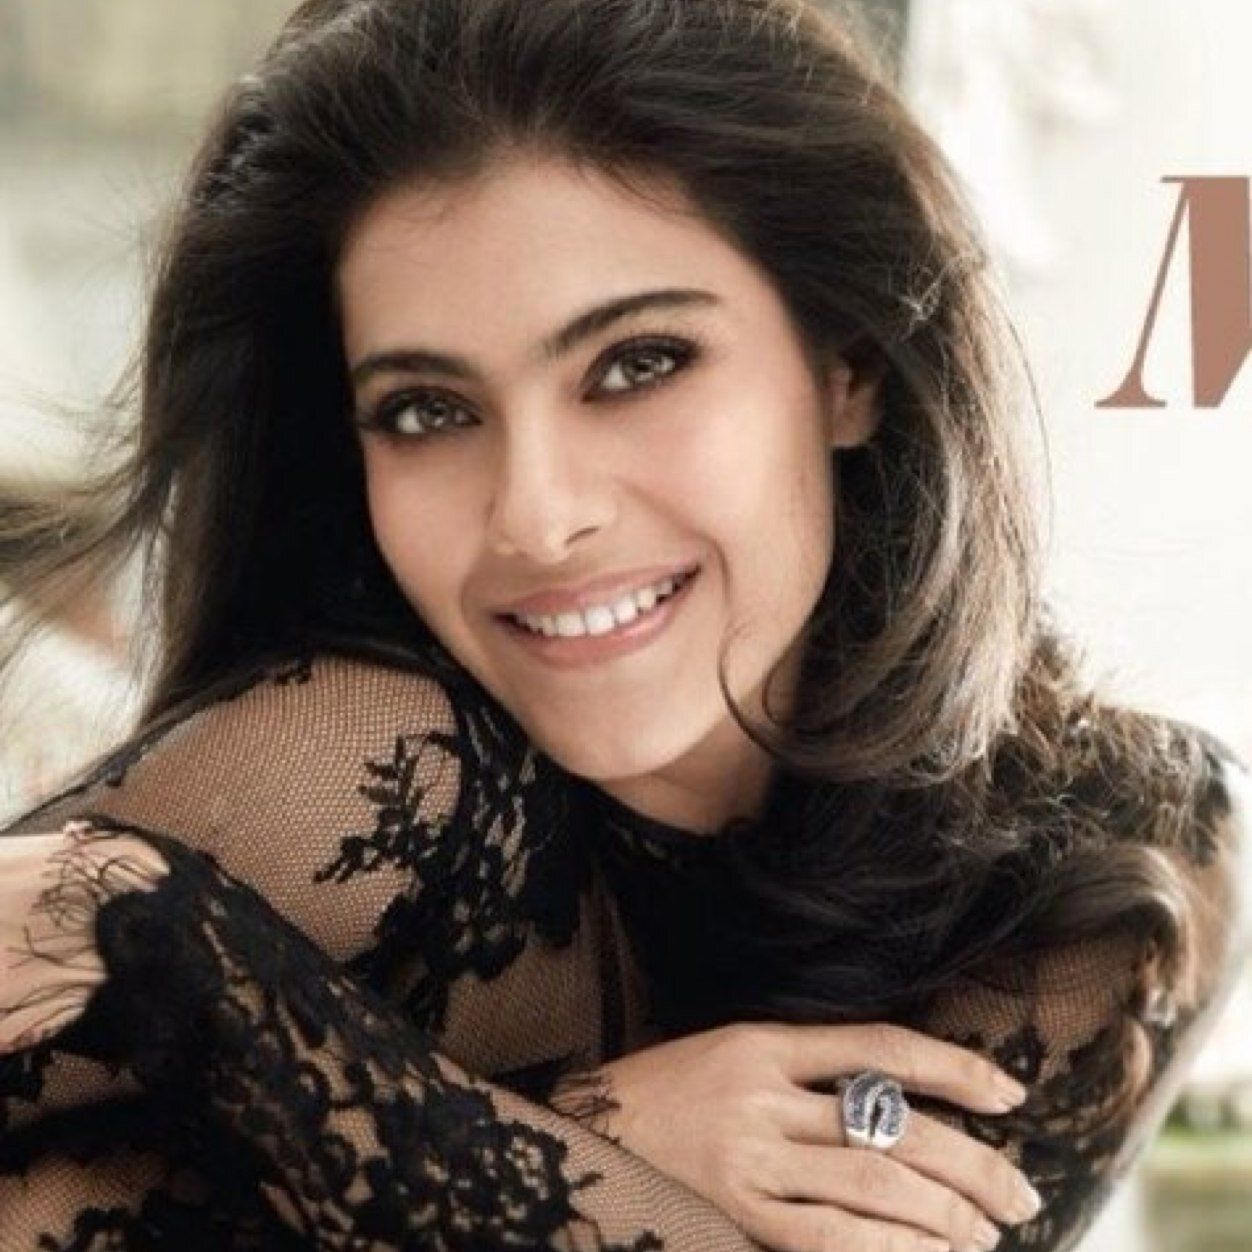 At 40, Kajol still makes us crave for her screen appearance